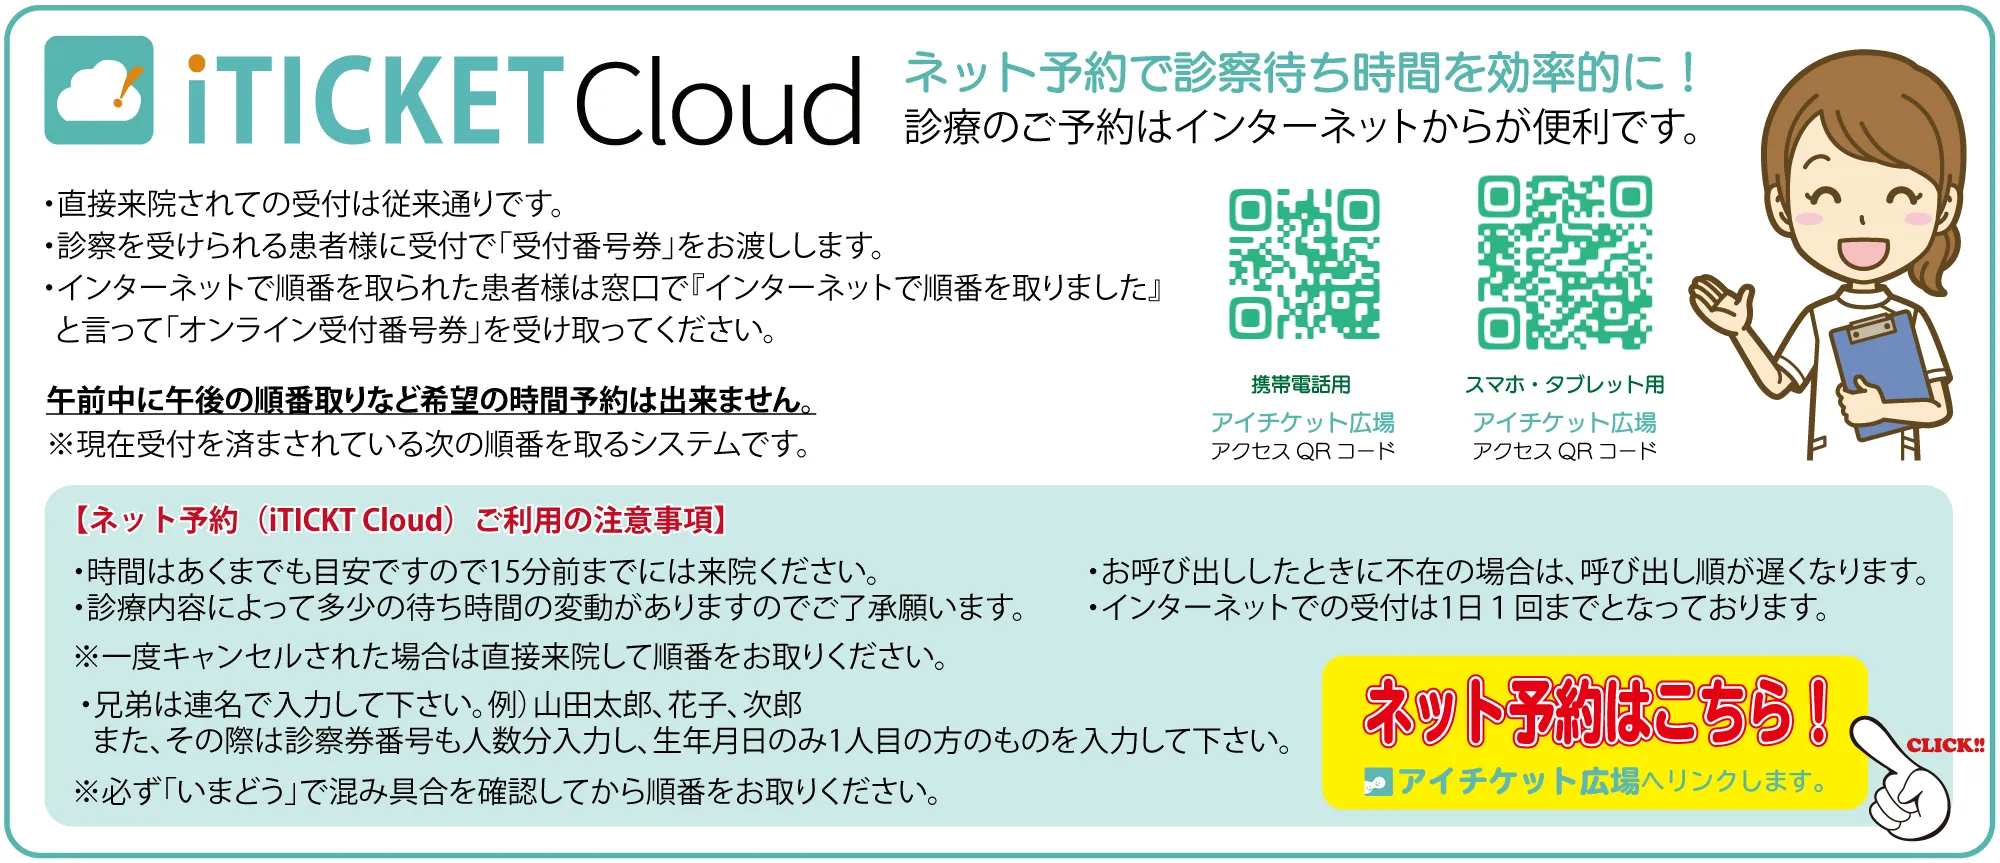 iTICKET Cloud